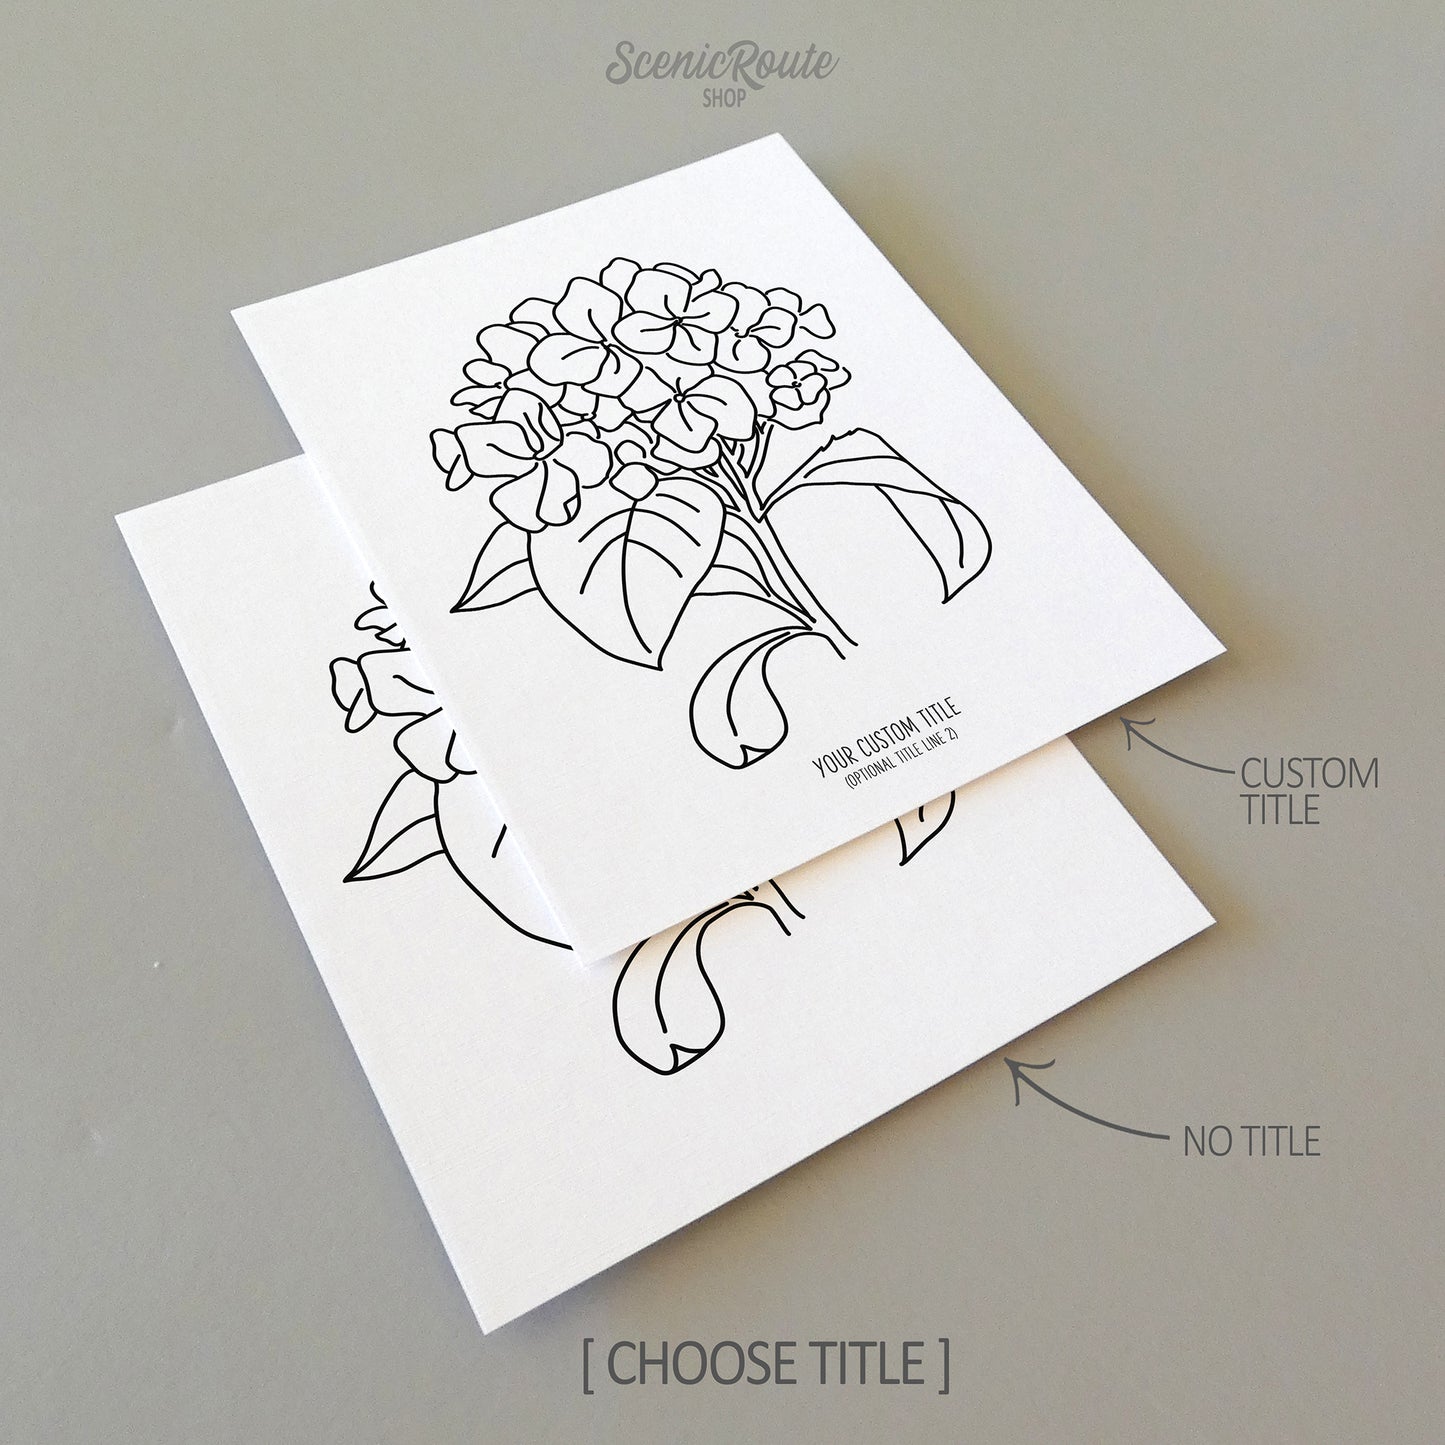 Two line art drawings of a Hydrangea Flower on white linen paper with a gray background.  The pieces are shown with “No Title” and “Custom Title” options for the available art print options.